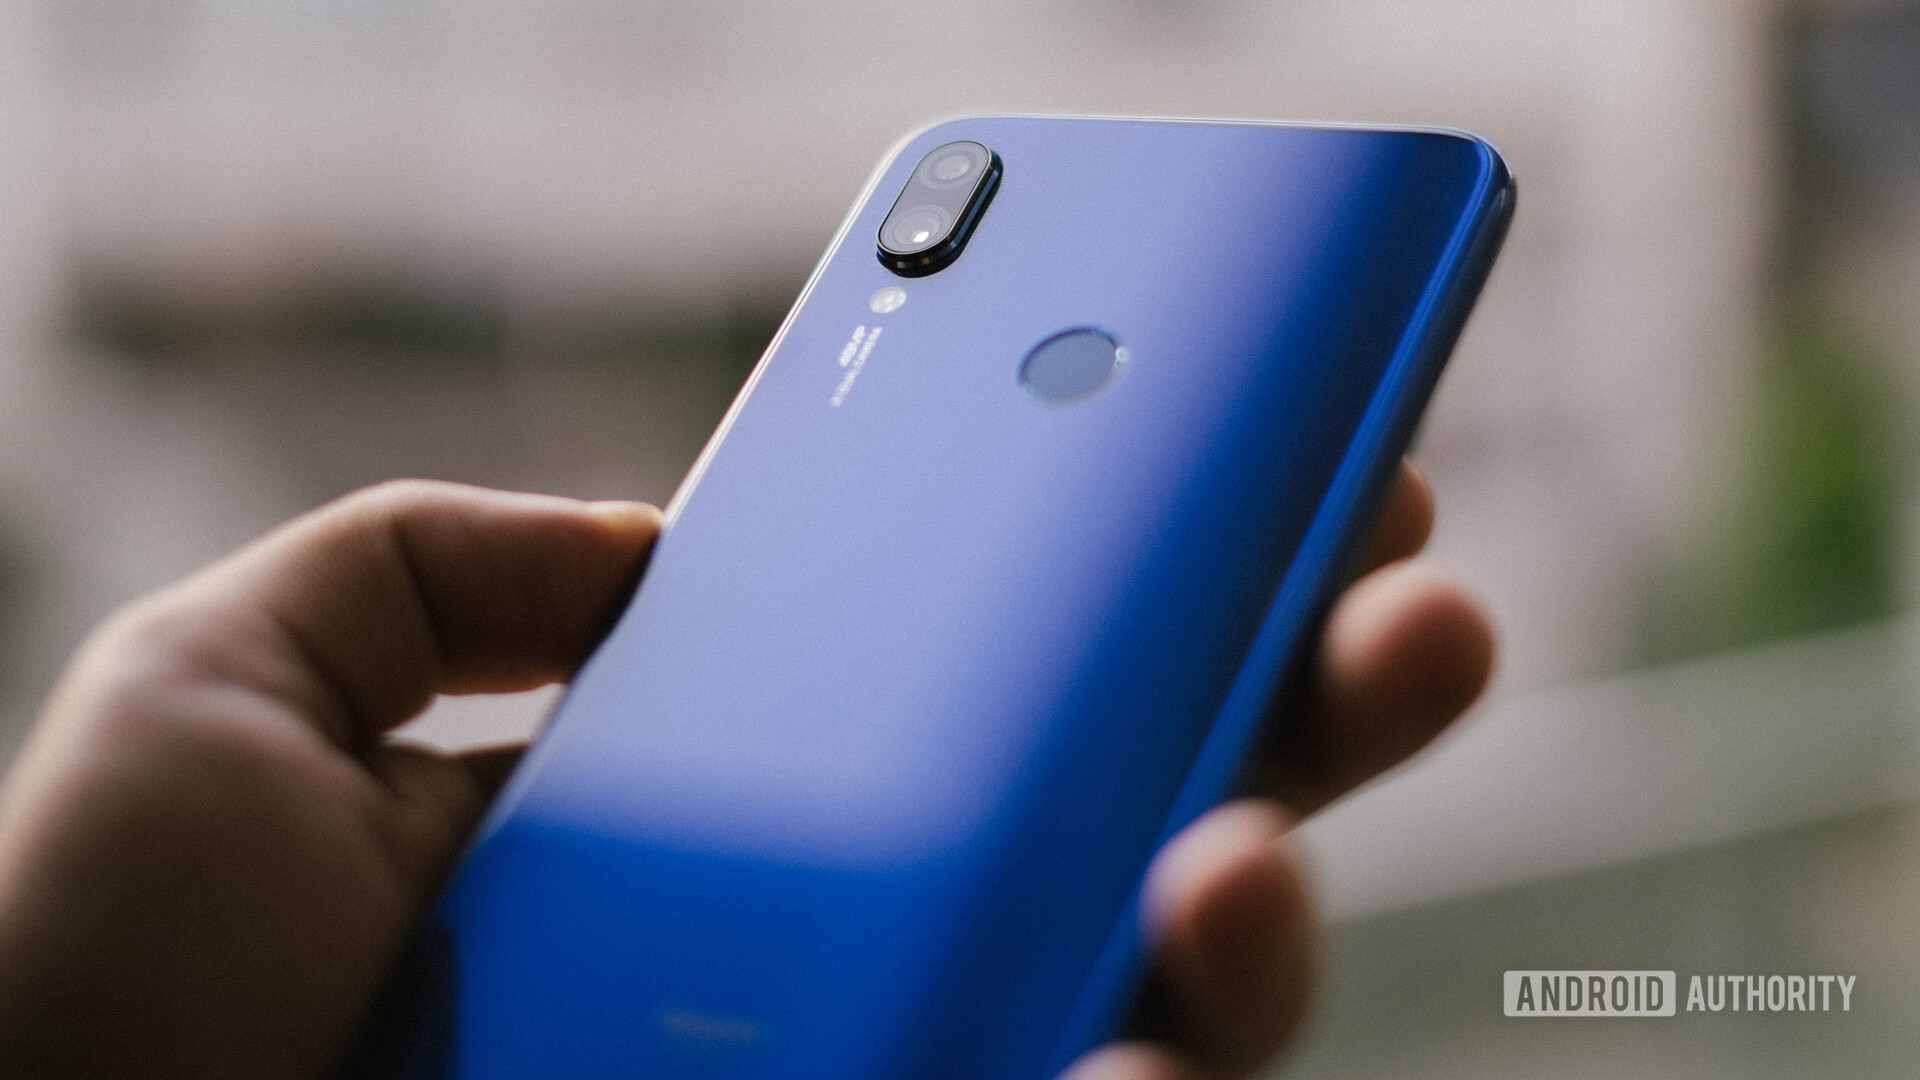 Redmi Note 7S with dual rear cameras